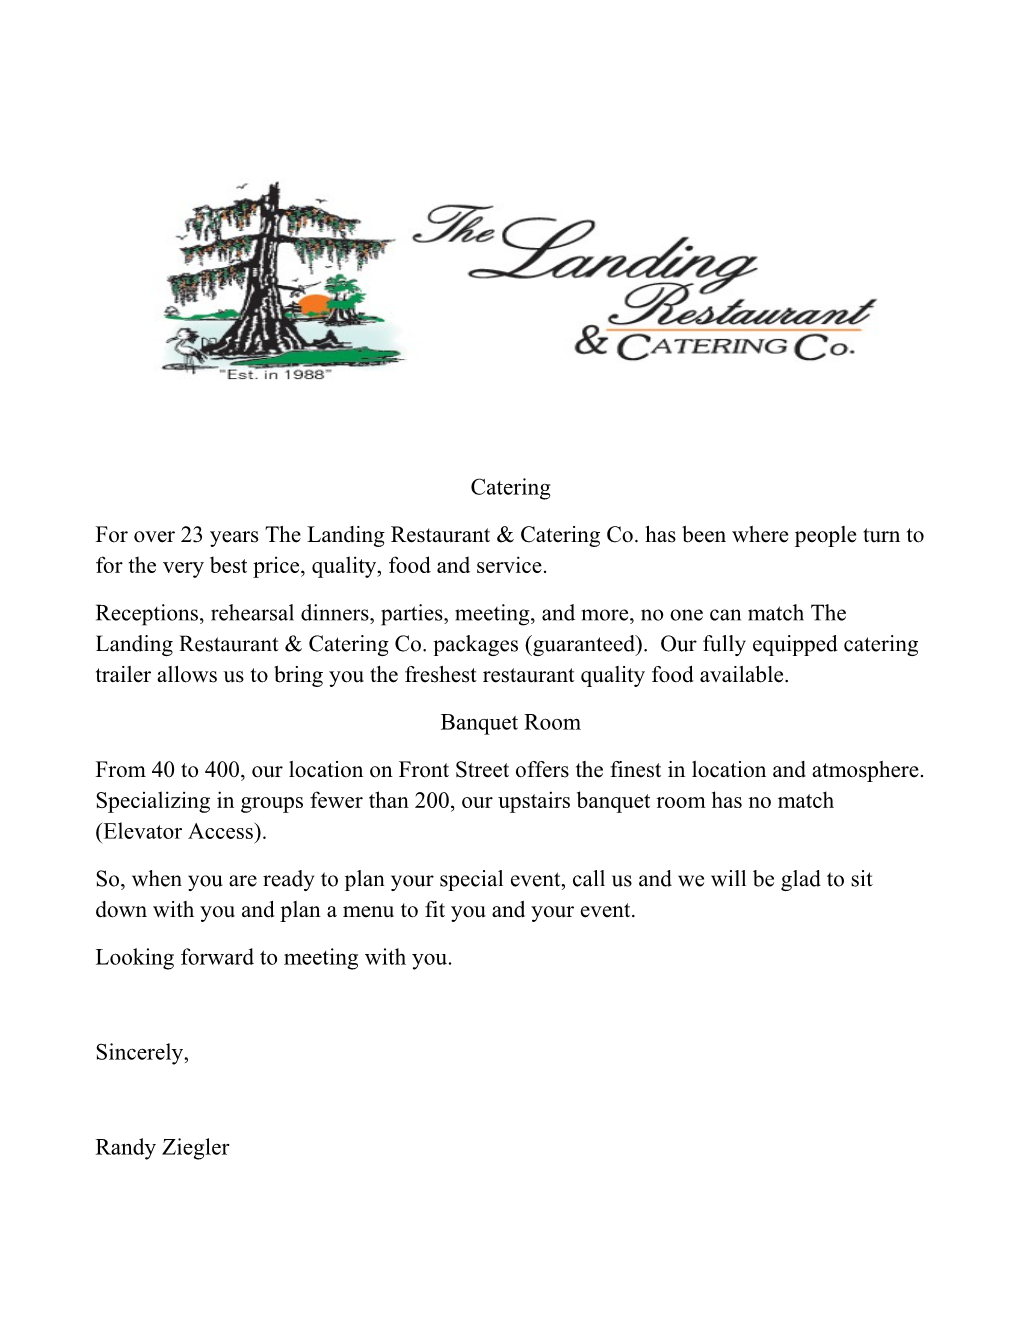 For Over 23 Years the Landing Restaurant & Catering Co. Has Been Where People Turn to For